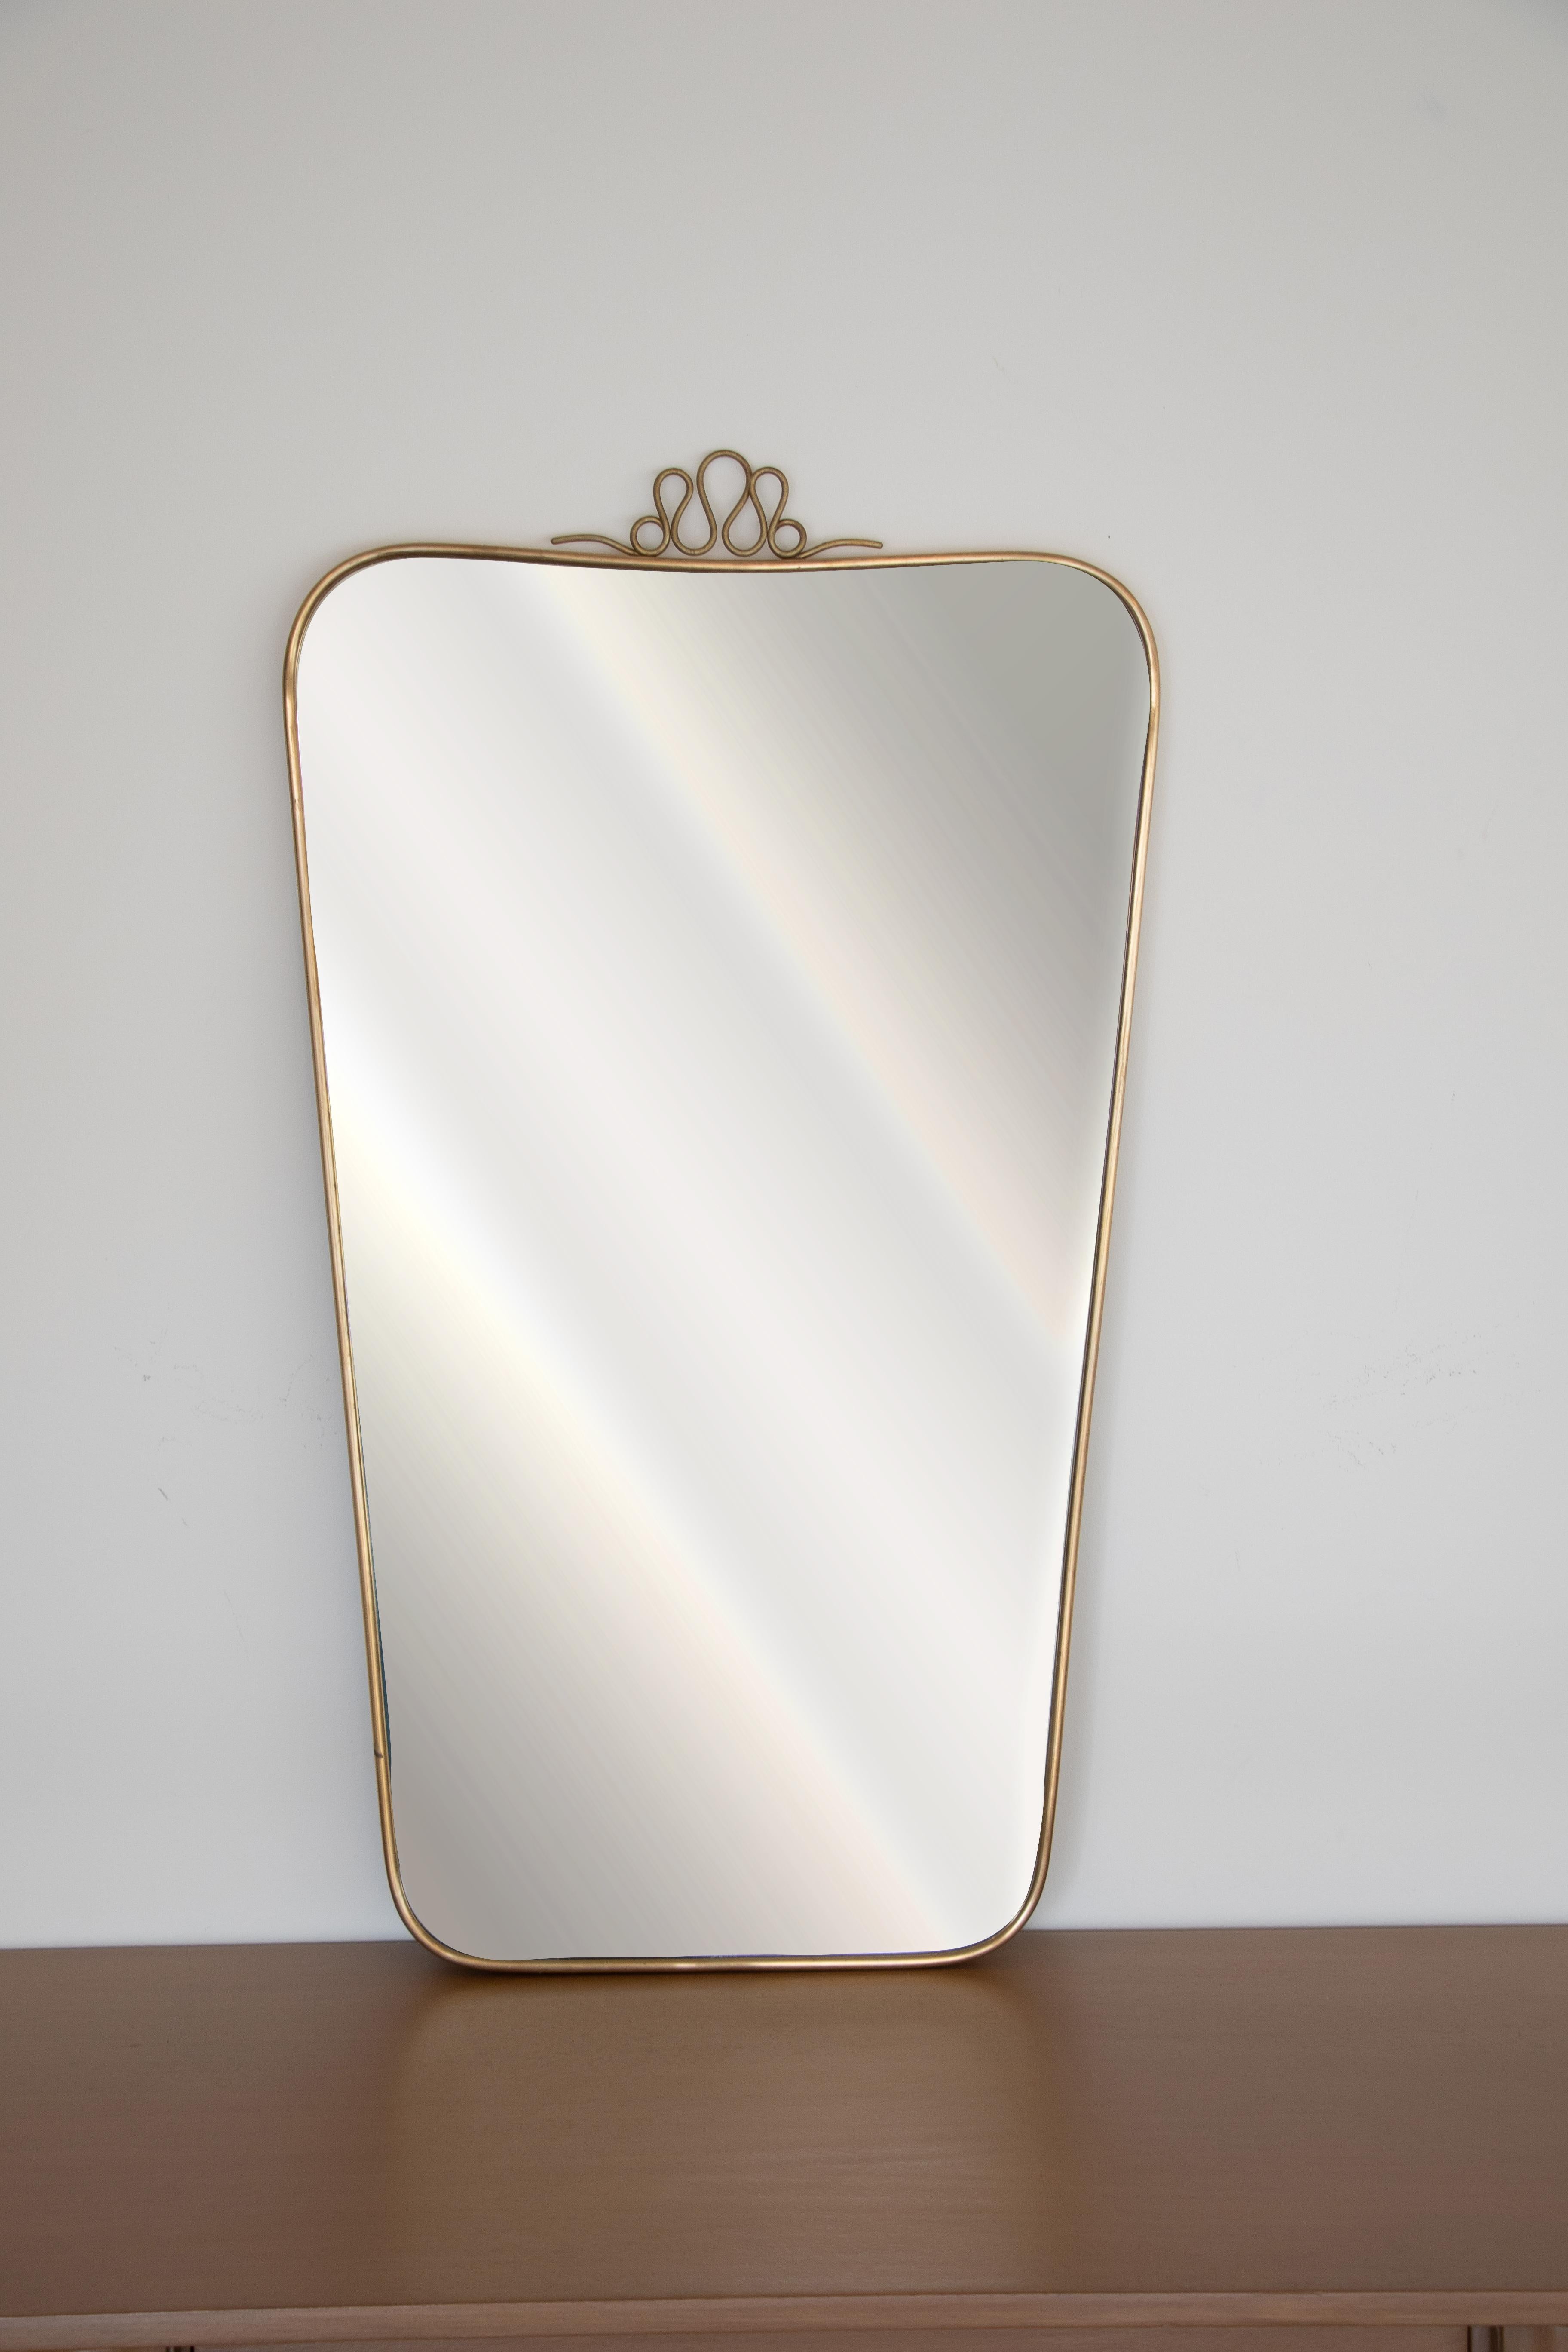 Vintage Italian brass mirror from the 1950s in the style of Gio Ponti. Wood backing with brass frame around wavy mirror and beautiful curly loop top detail. Nice age and patina to brass. 

Additional measurements: Top width 18.5